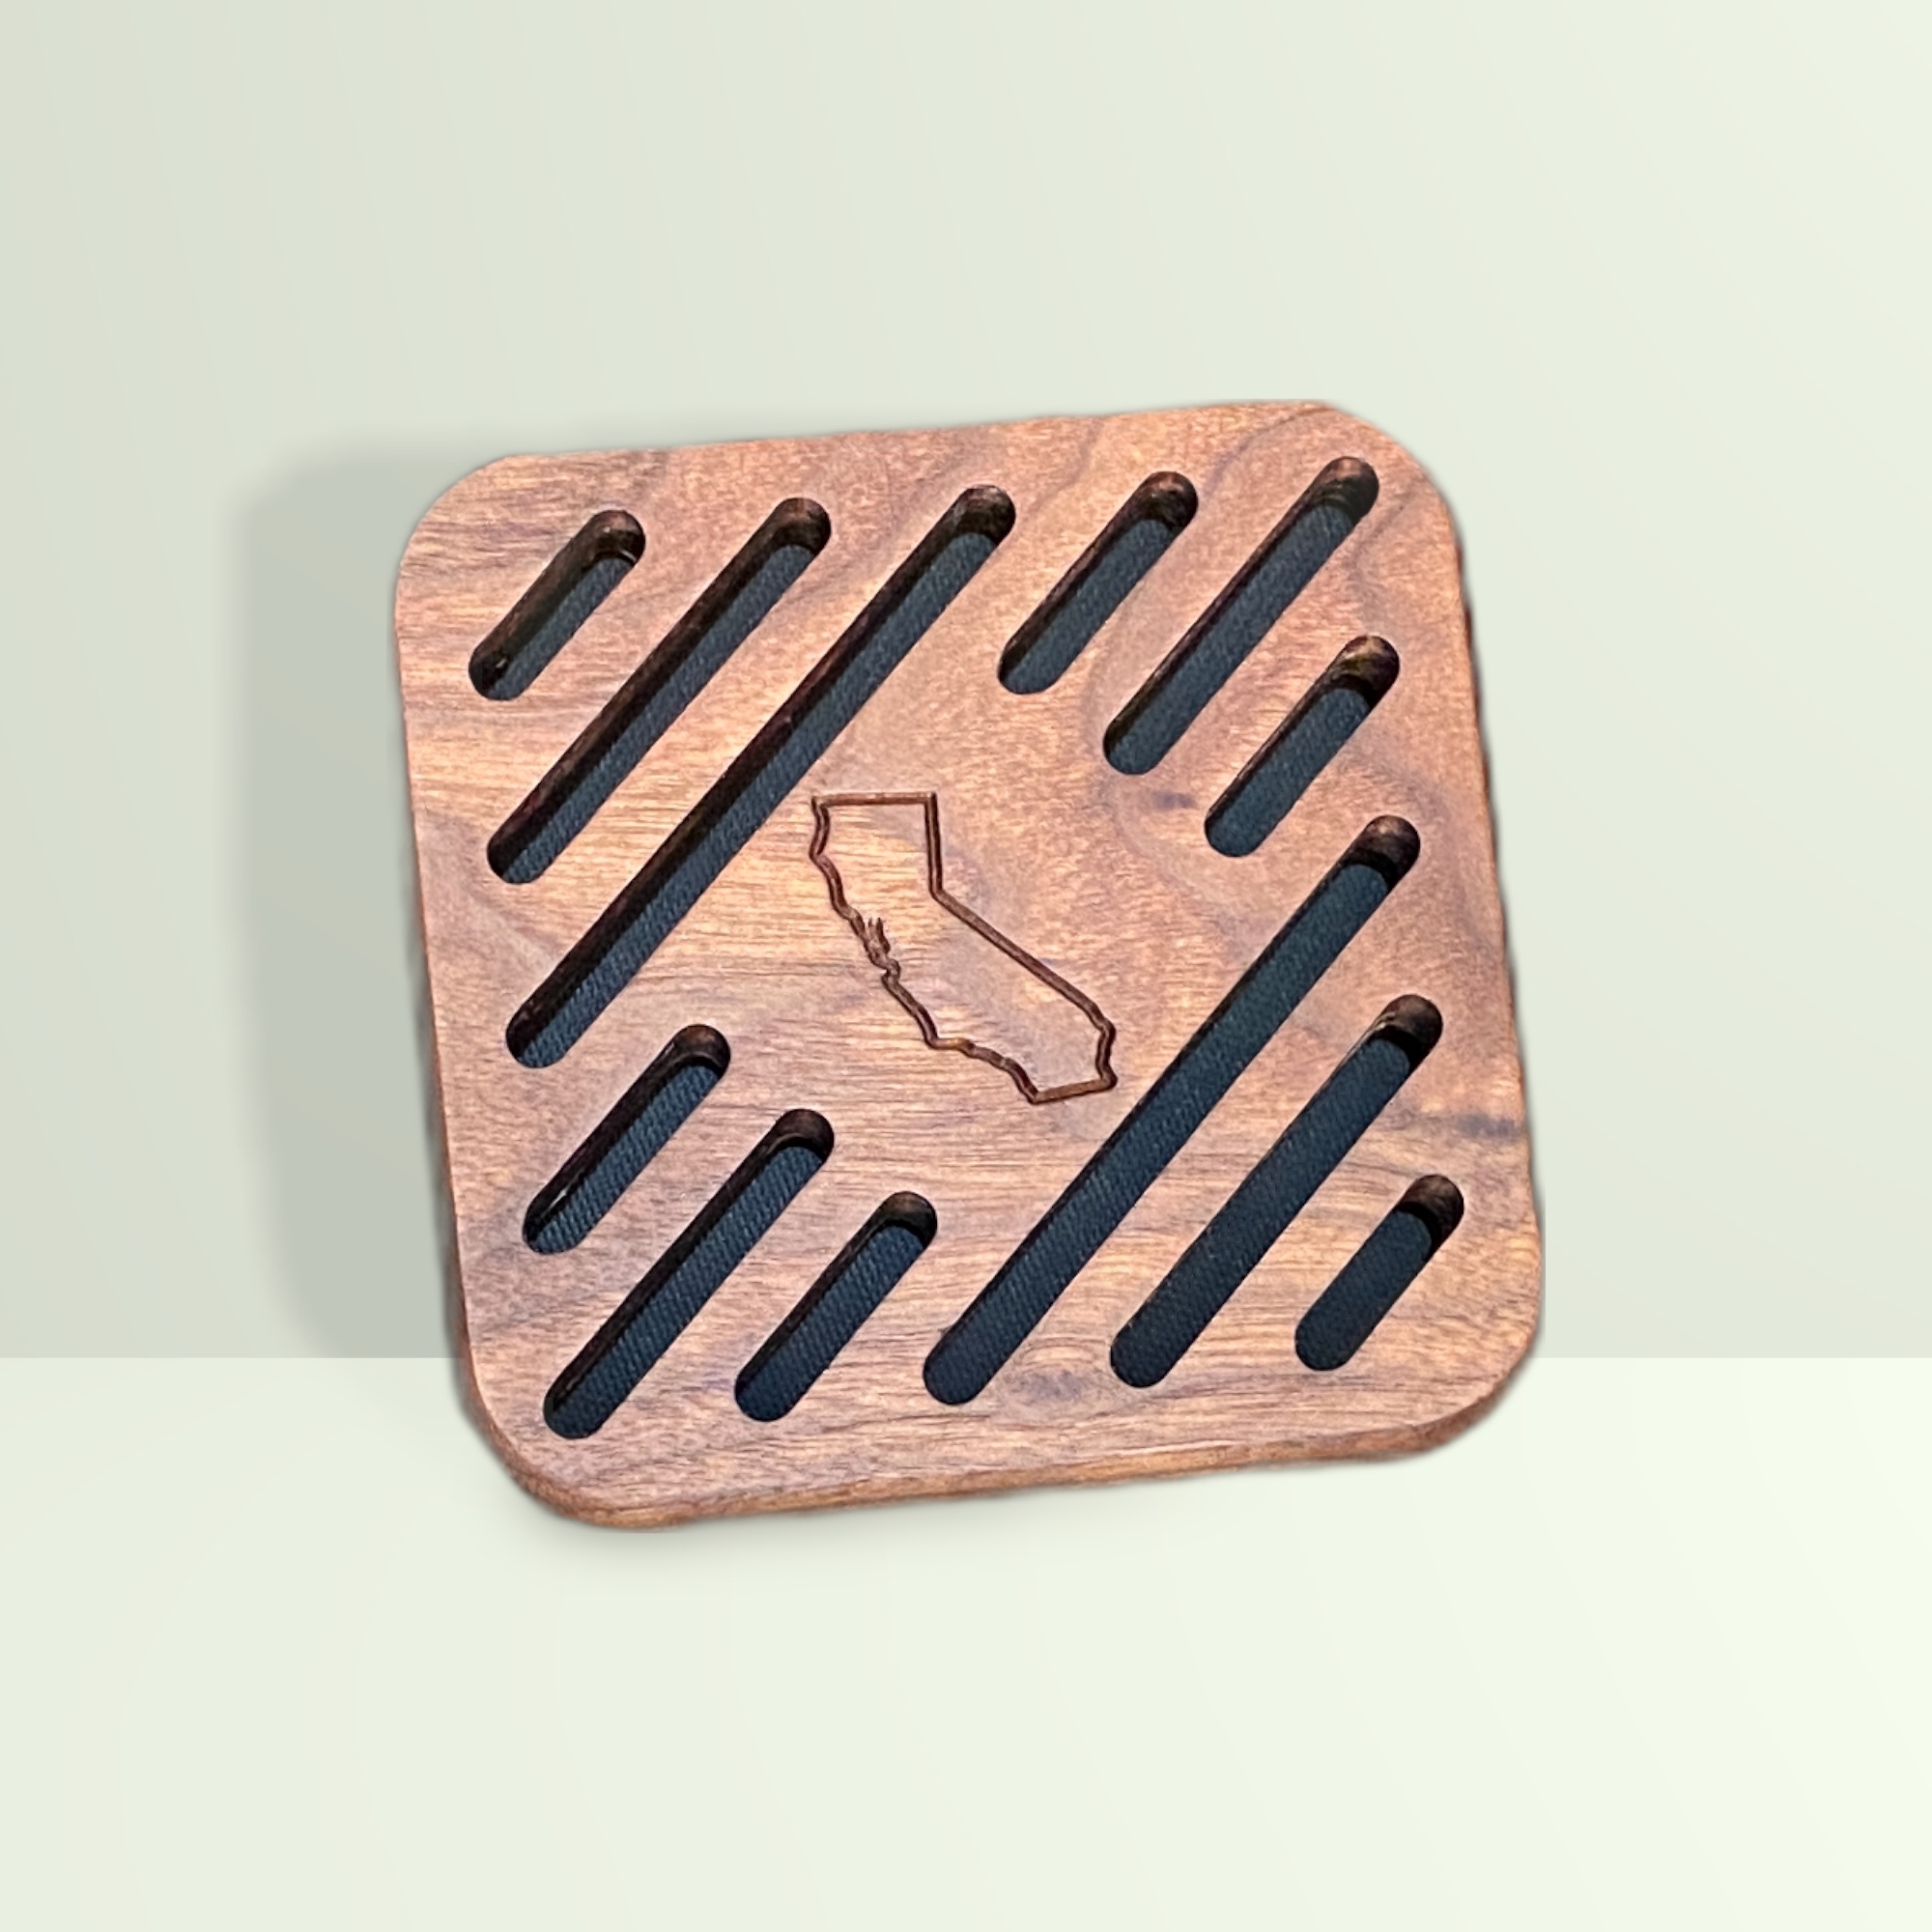 Wood trivet for holding hot pans; made from Walnut, designed by John Wayne Hill of DeathGhost Studios